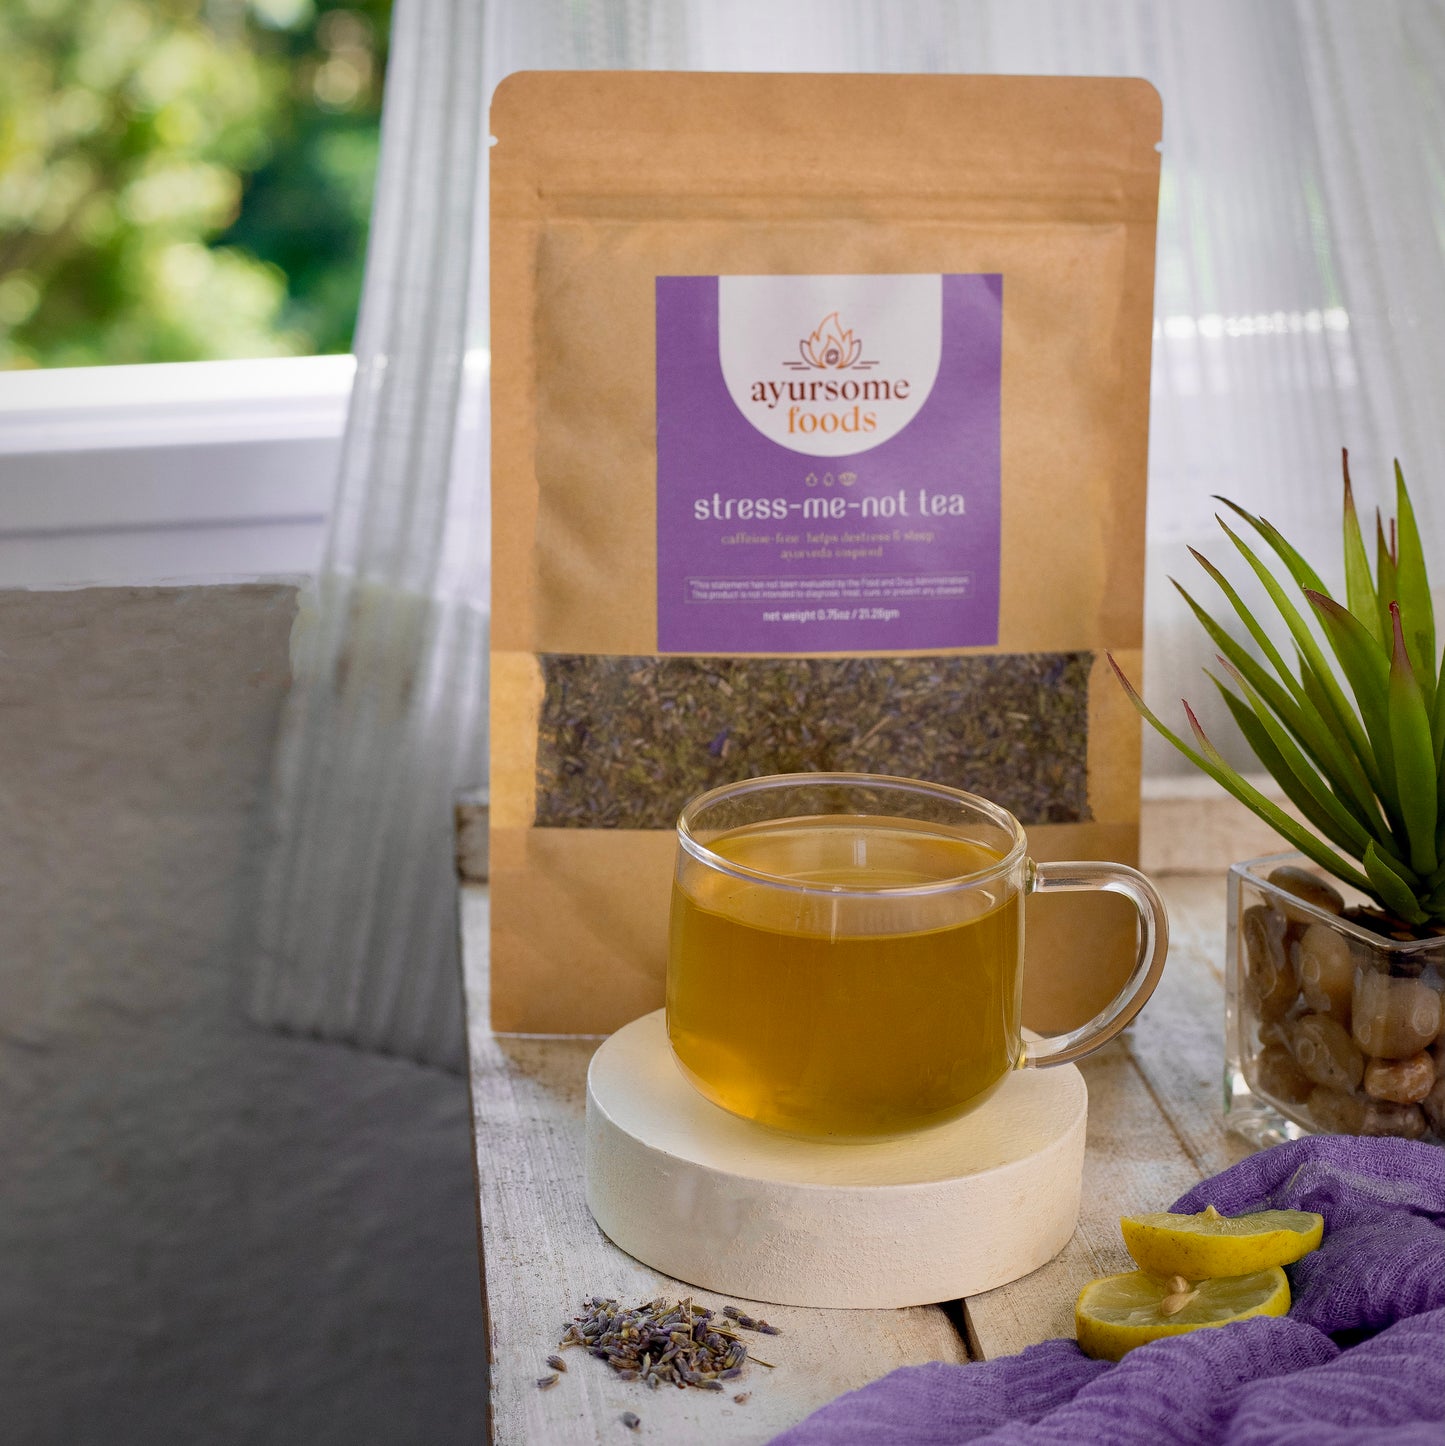 a cup of lavender tea for sleep along with loose leaf tea pack. the shot is against white background with a few slices of lemon and a purple napkin